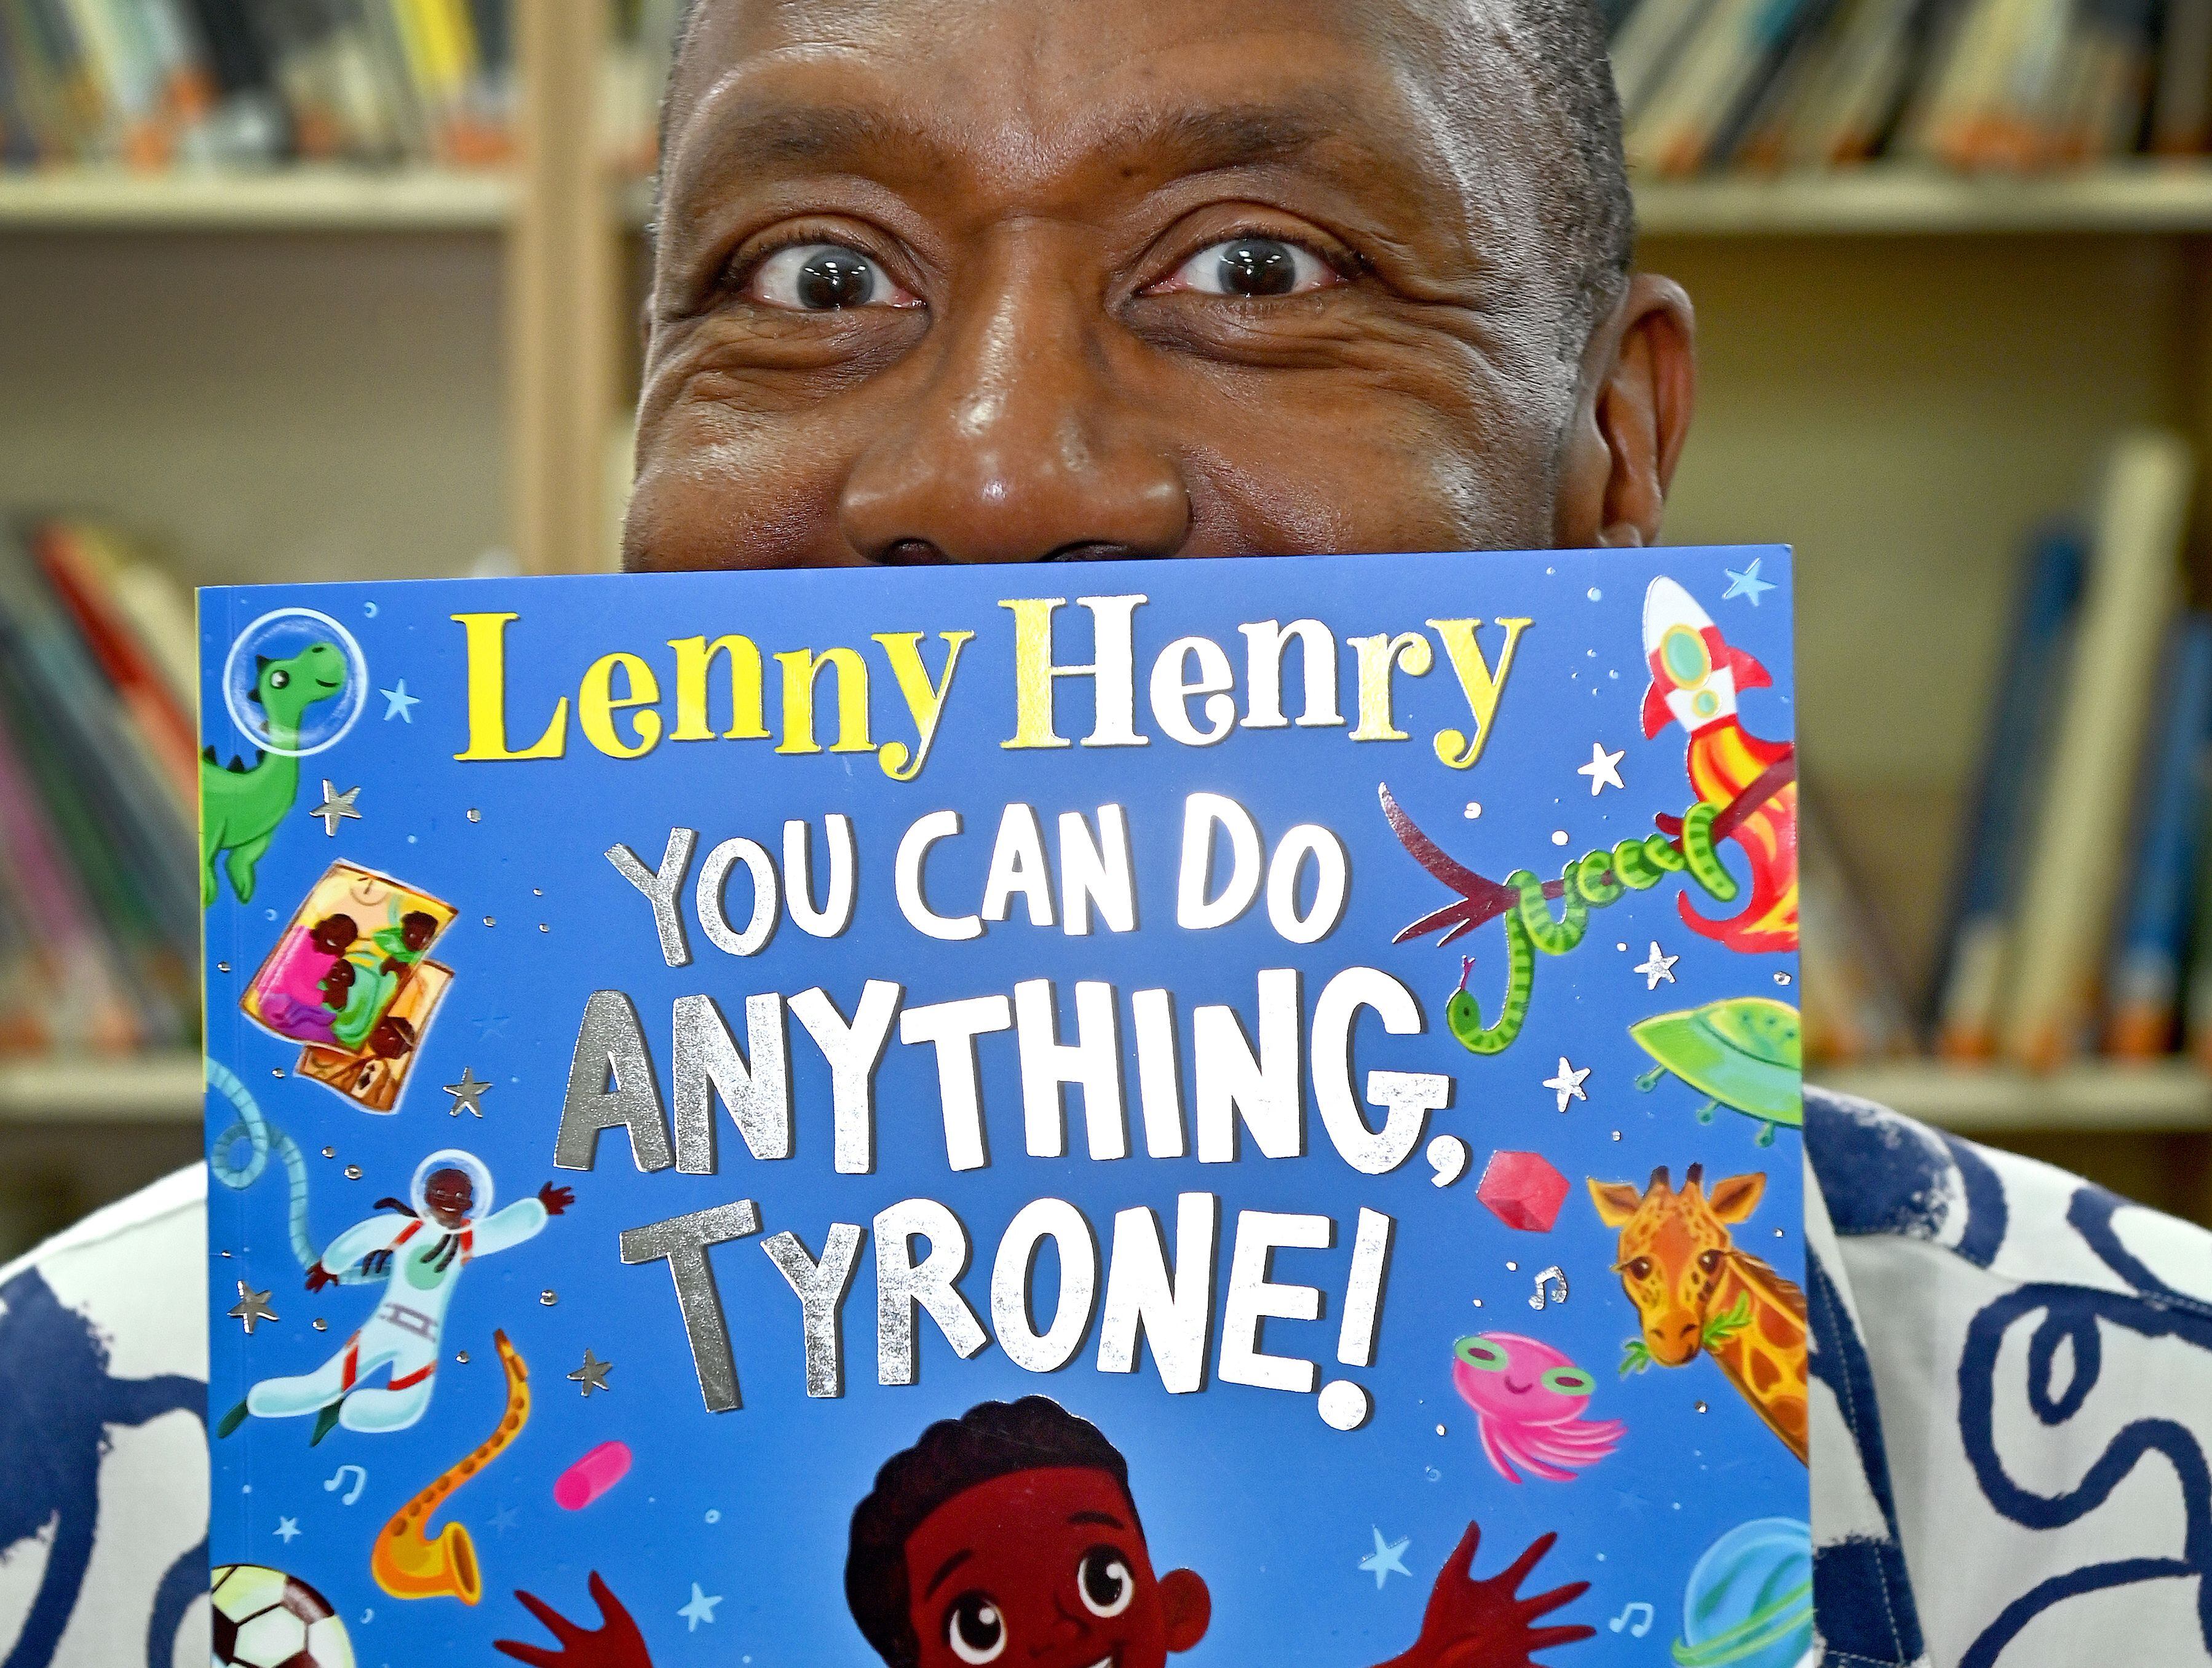 Sir Lenny Henry returns to special place to launch new book